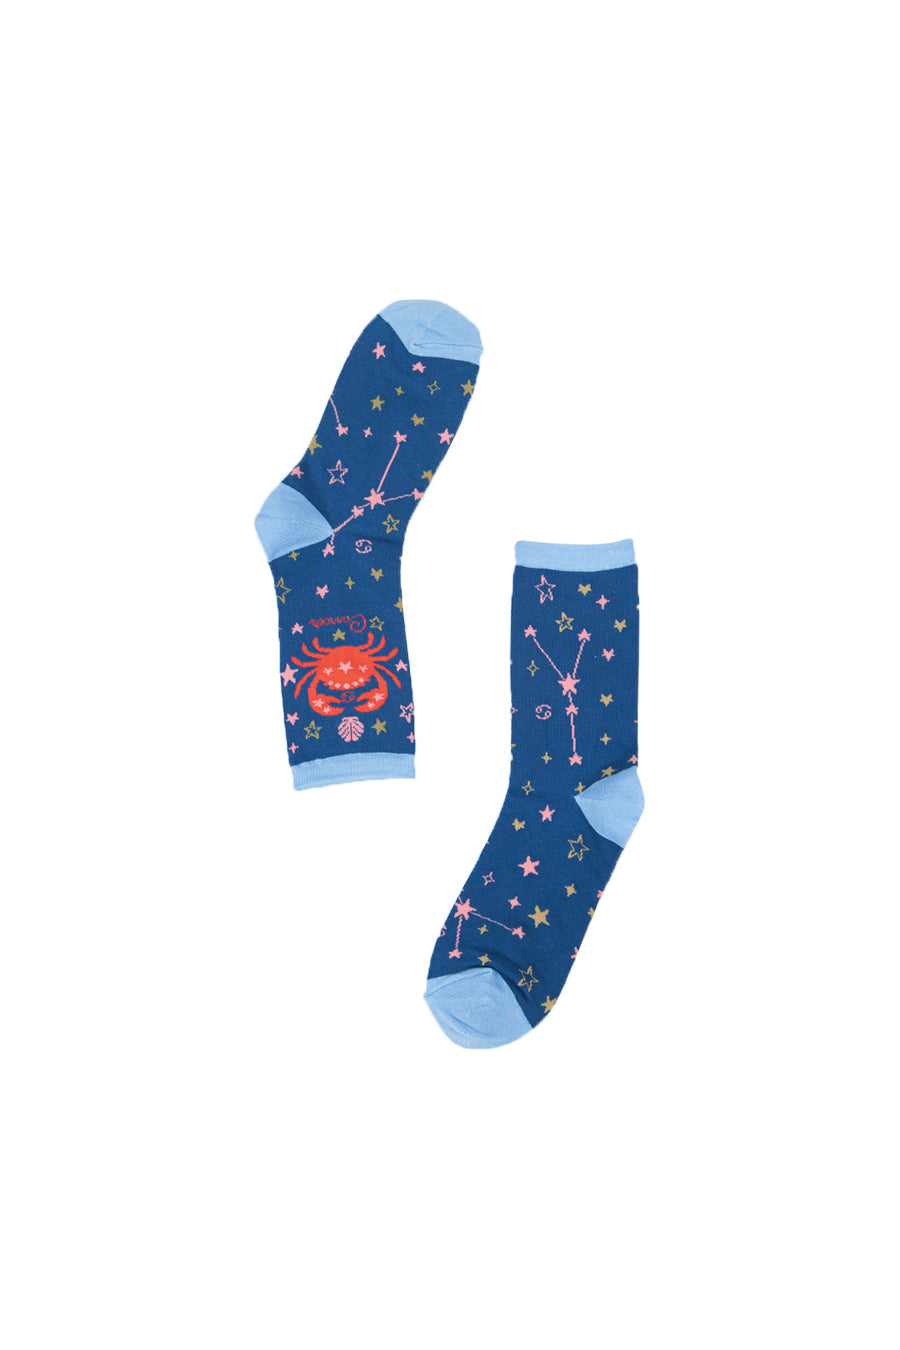 blue socks , cancer the crab is in red and the constellation is in in pink